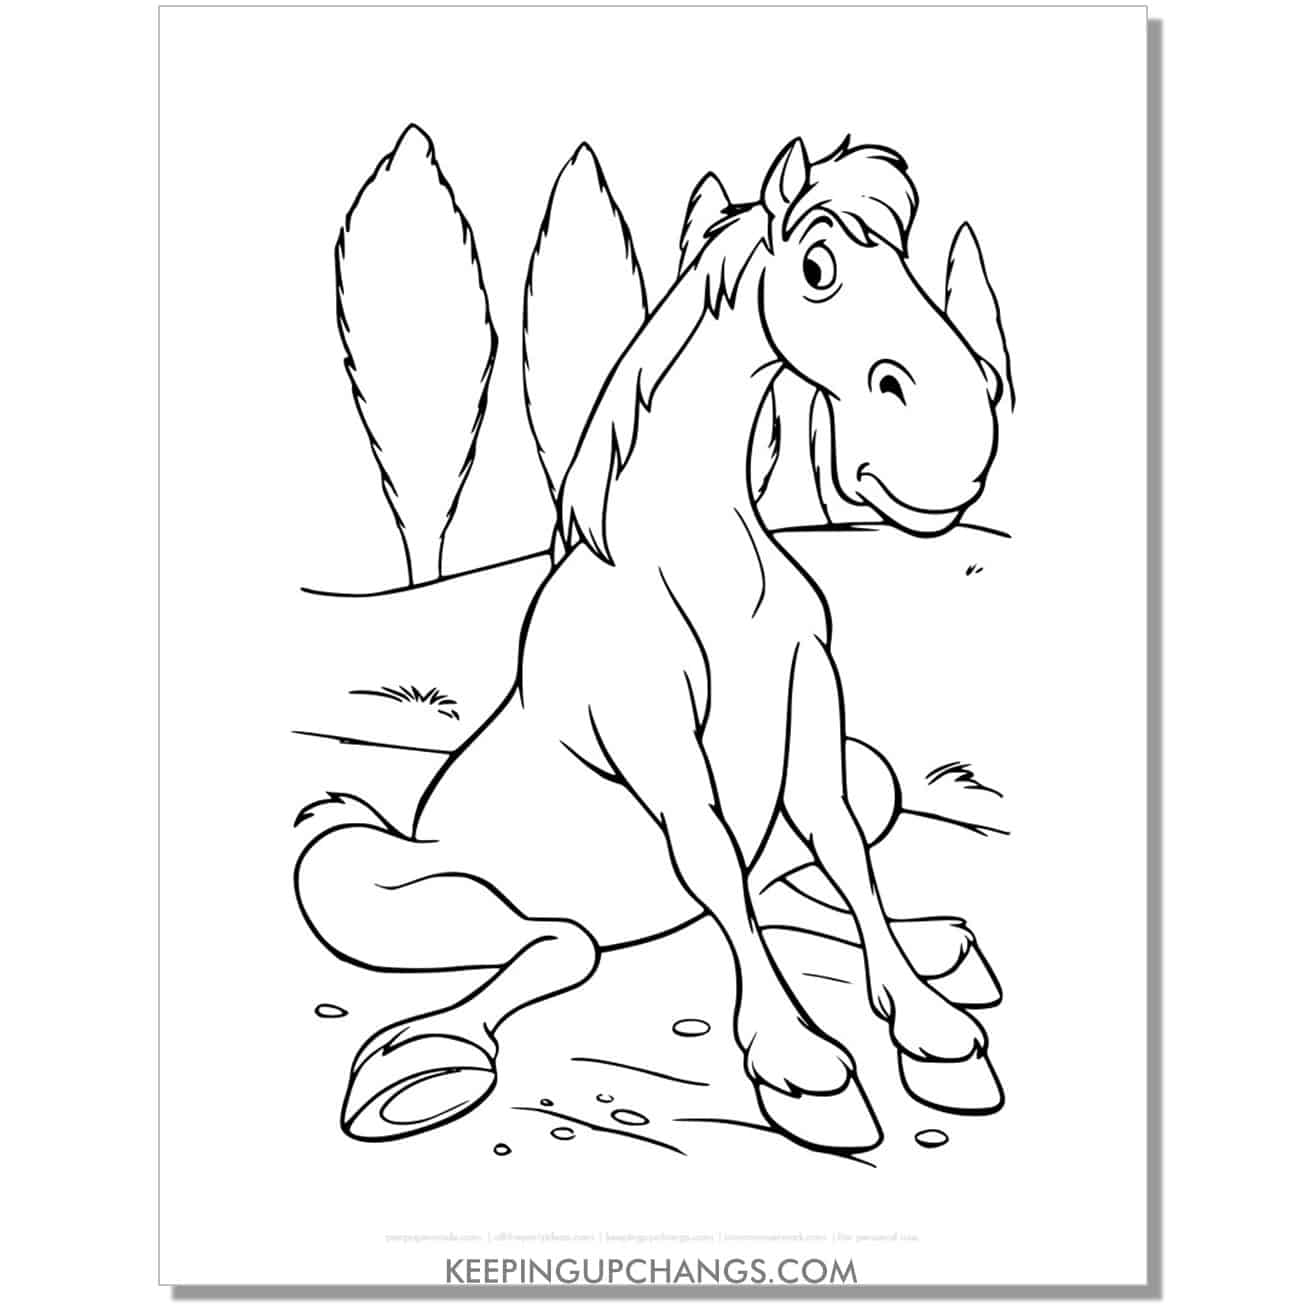 cinderella horse major sitting on ground coloring page, sheet.